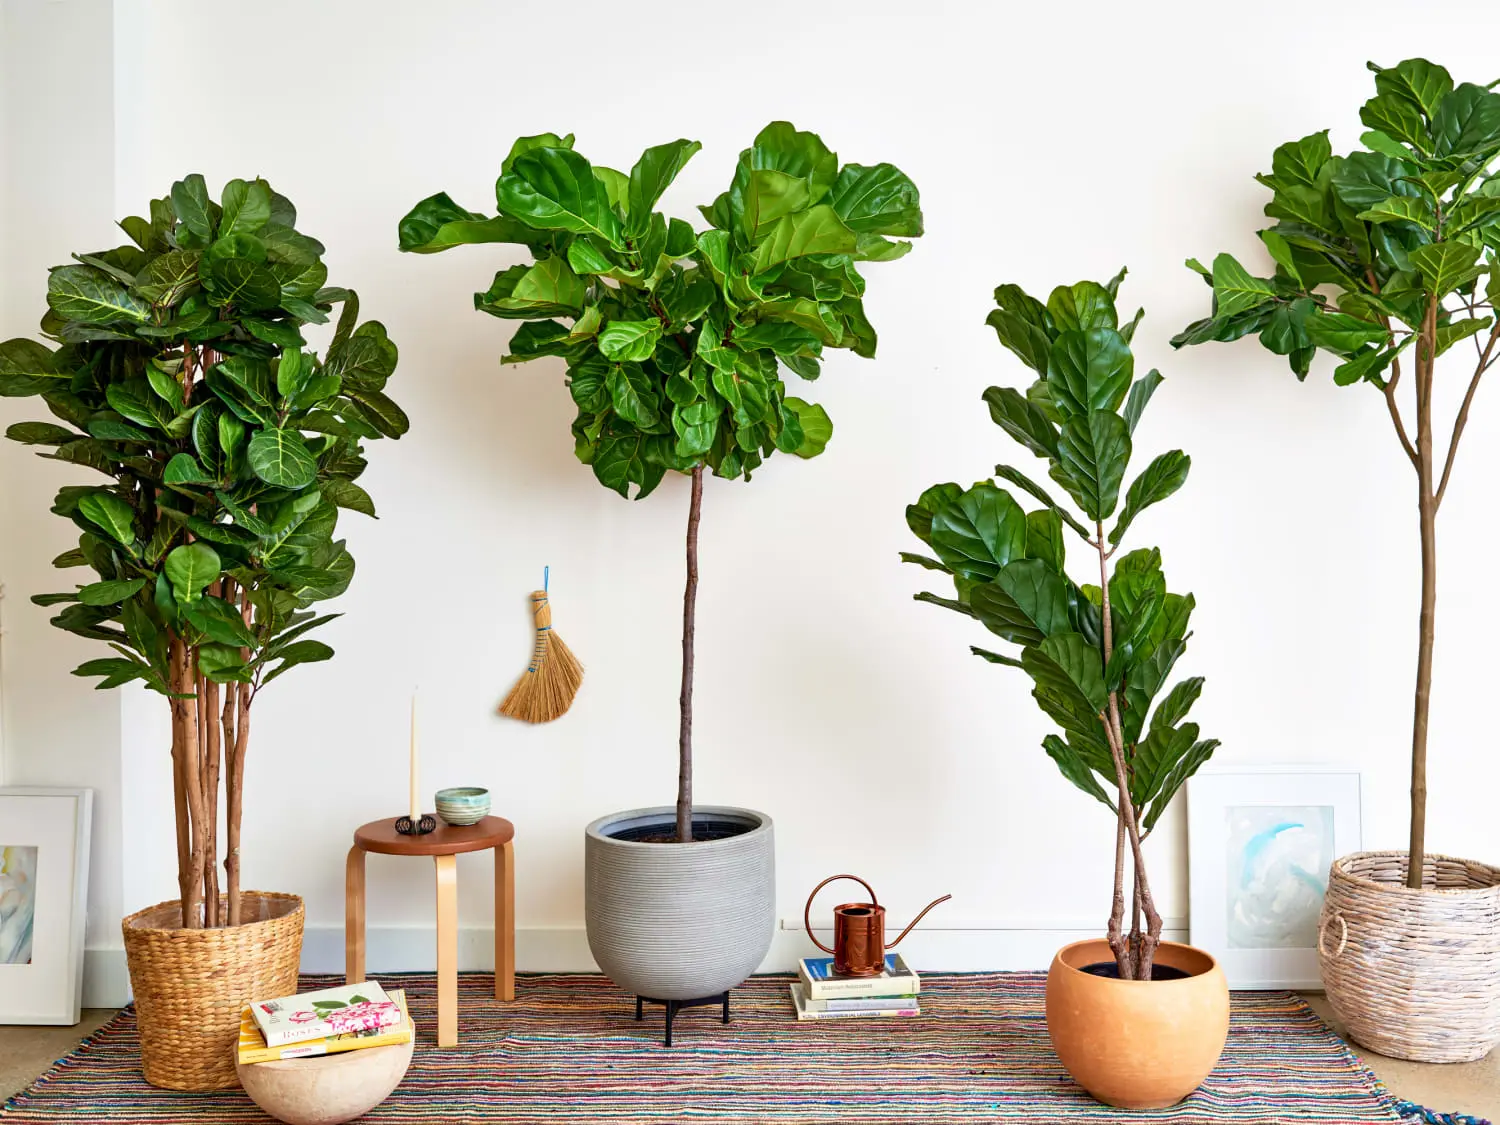 A Complete Knowledge of Fiddle Leaf Fig Plant – Its Benefits, Spiritual Meaning, and More